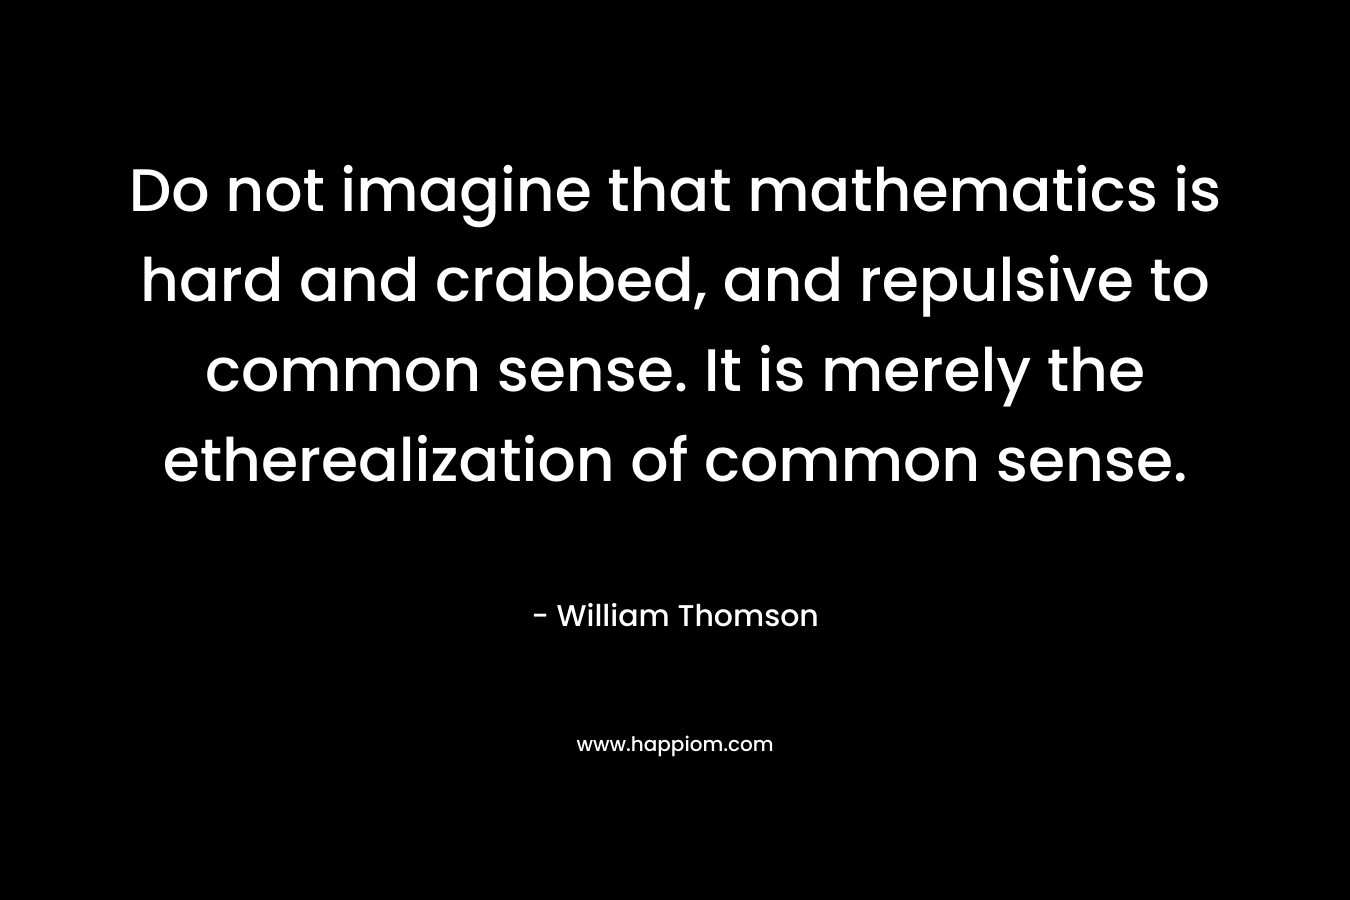 Do not imagine that mathematics is hard and crabbed, and repulsive to common sense. It is merely the etherealization of common sense.